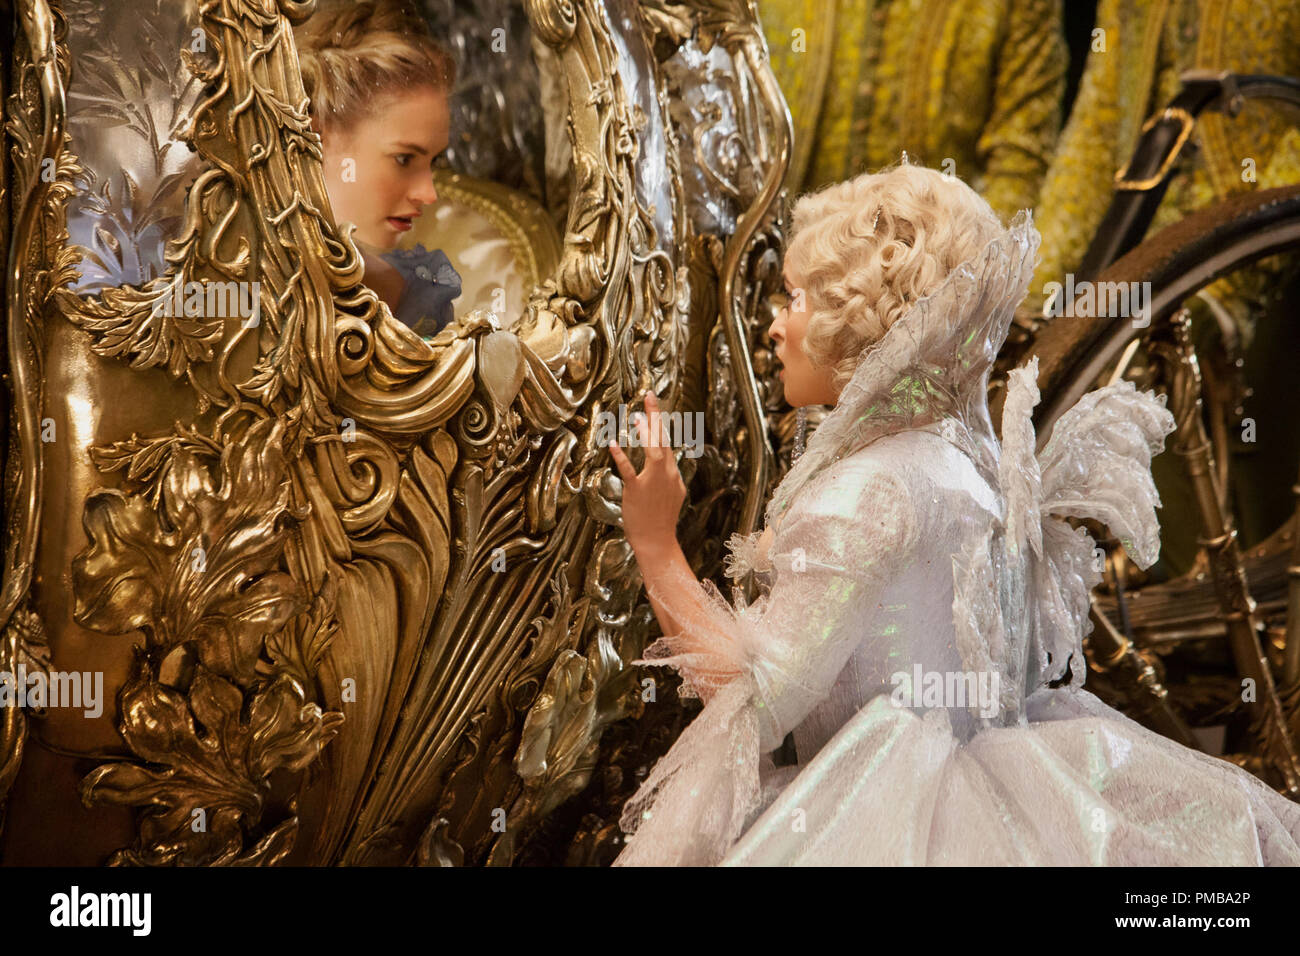 Lily James Is Cinderella And Helena Bonham Carter Is The Fairy Godmother In Disney S Live Action Cinderella Directed By Kenneth Branagh Stock Photo Alamy